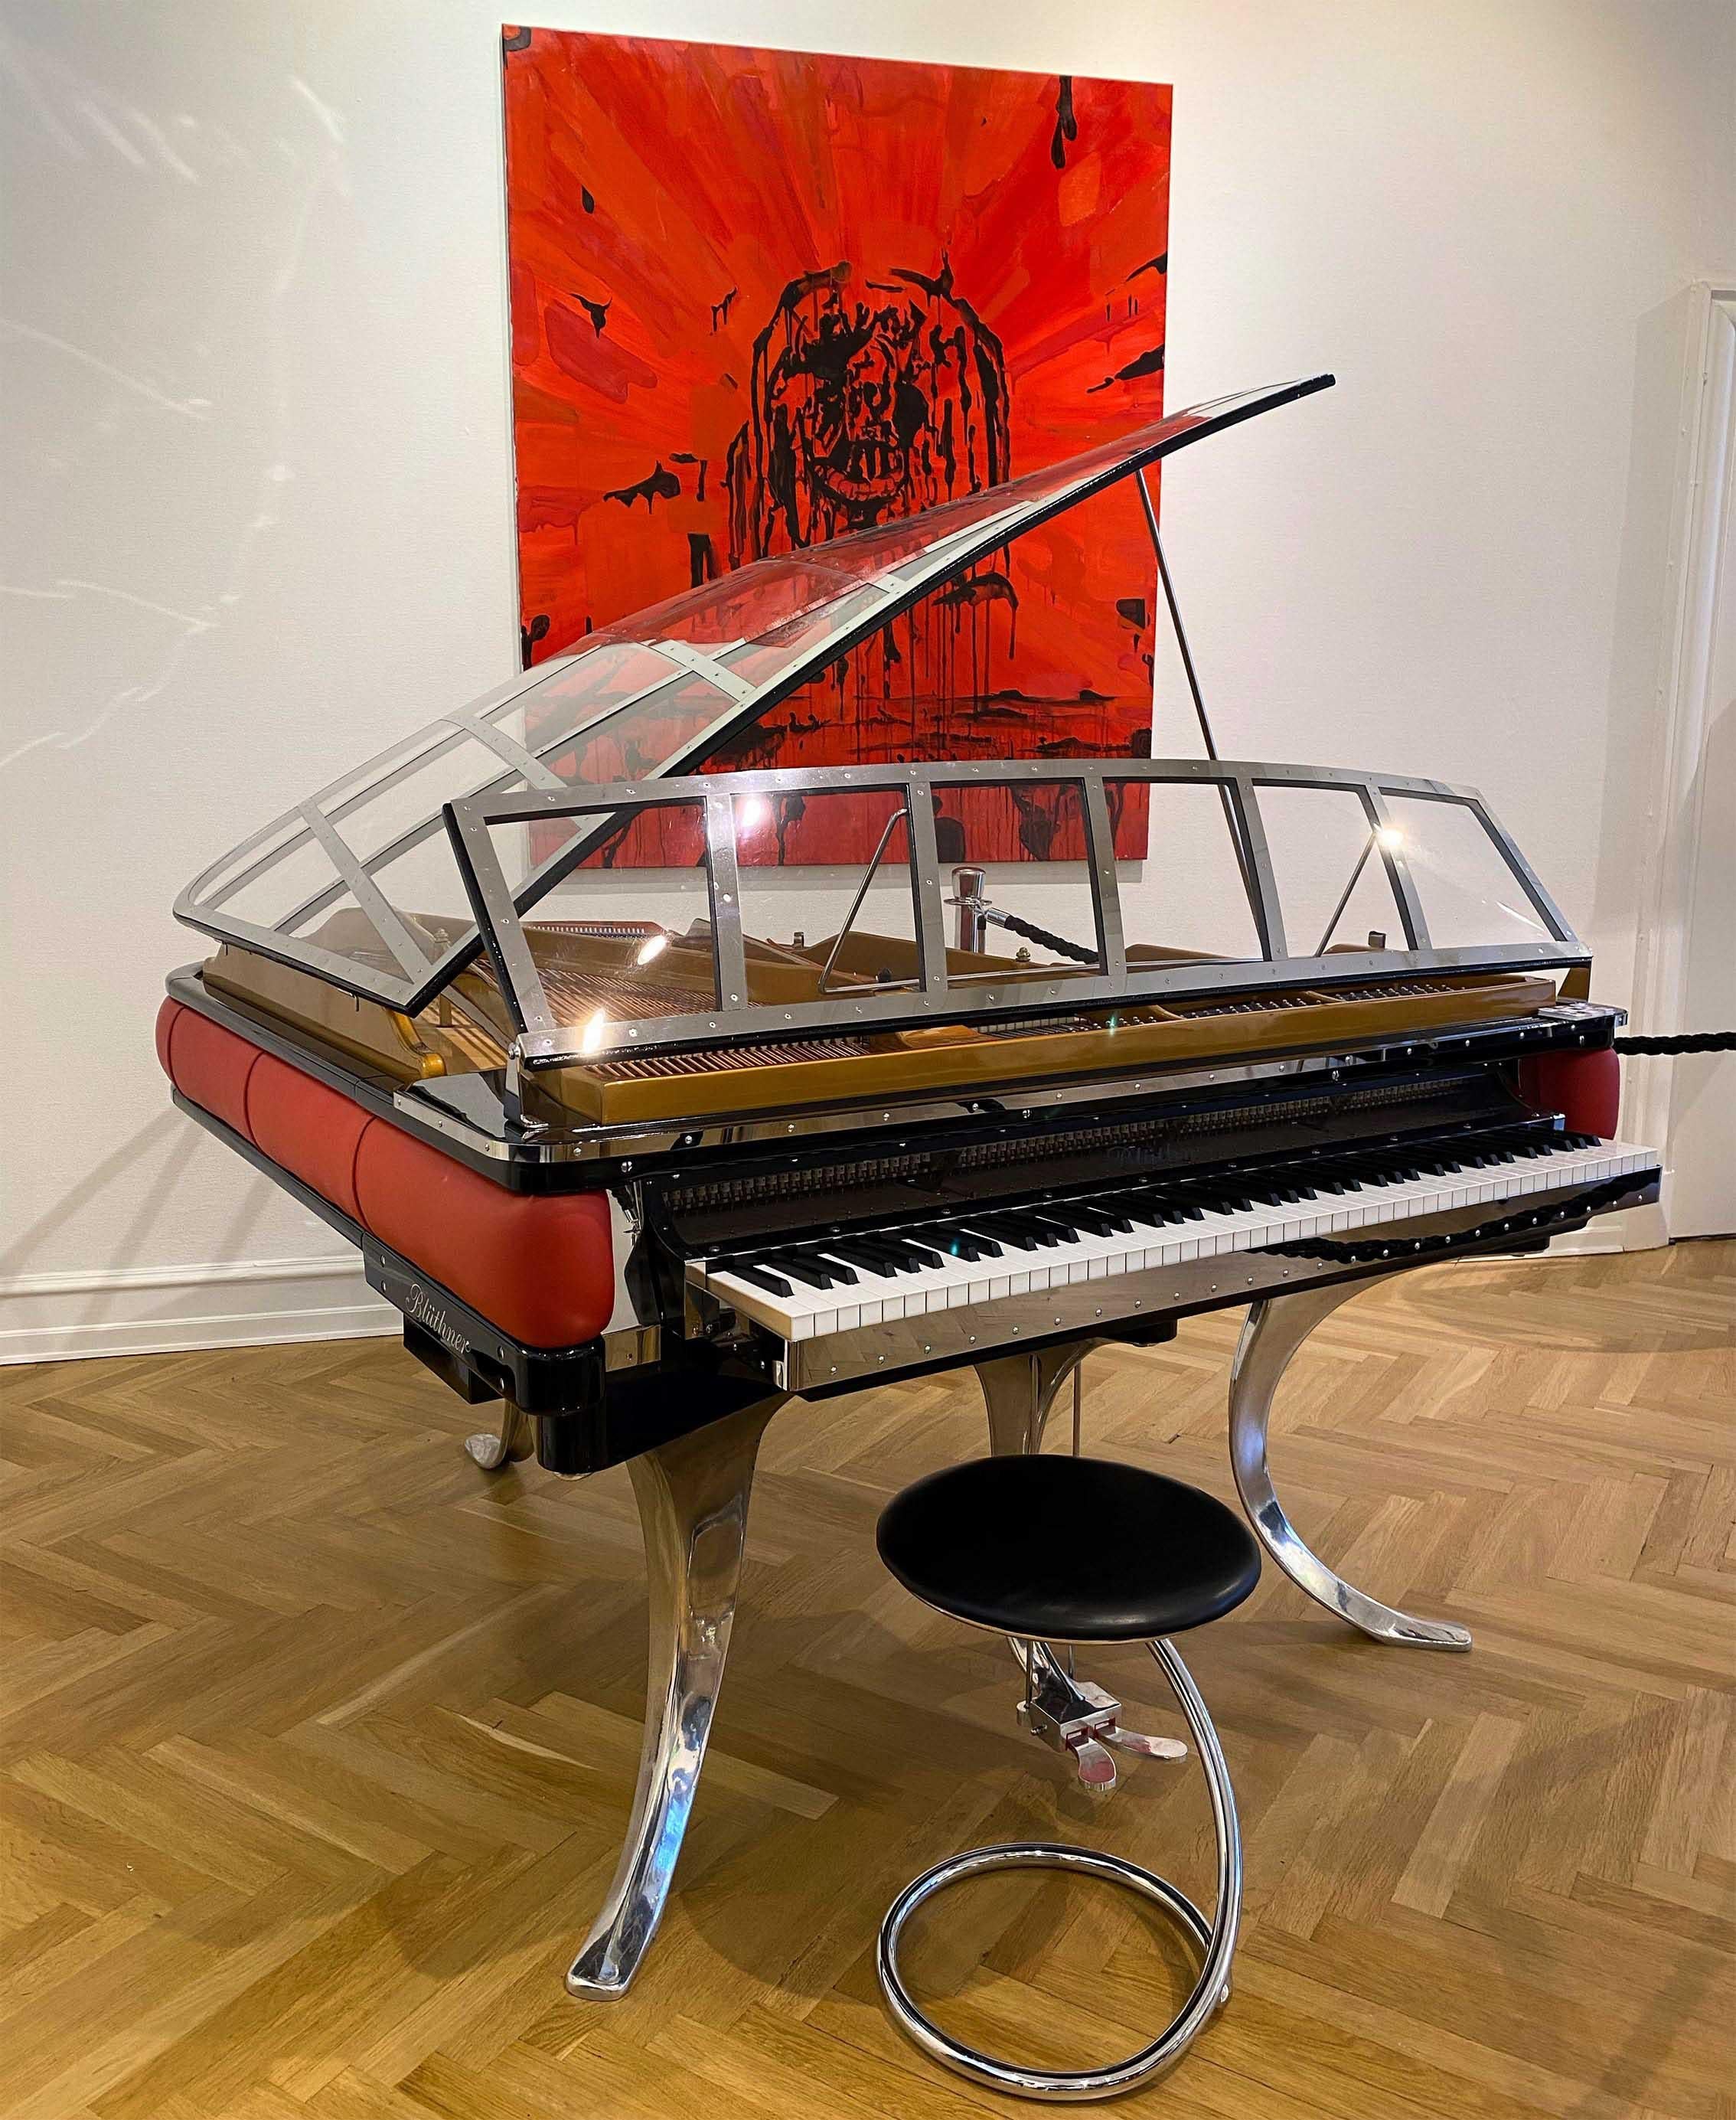 - All prices are listed ex works.
- 5 year guarantee.
- We regularly crate, ship and install PH Pianos worldwide with full insurance.

This PH Grand Piano is crafted in 2018 and is a total eye catching icon with the red leather rim and high